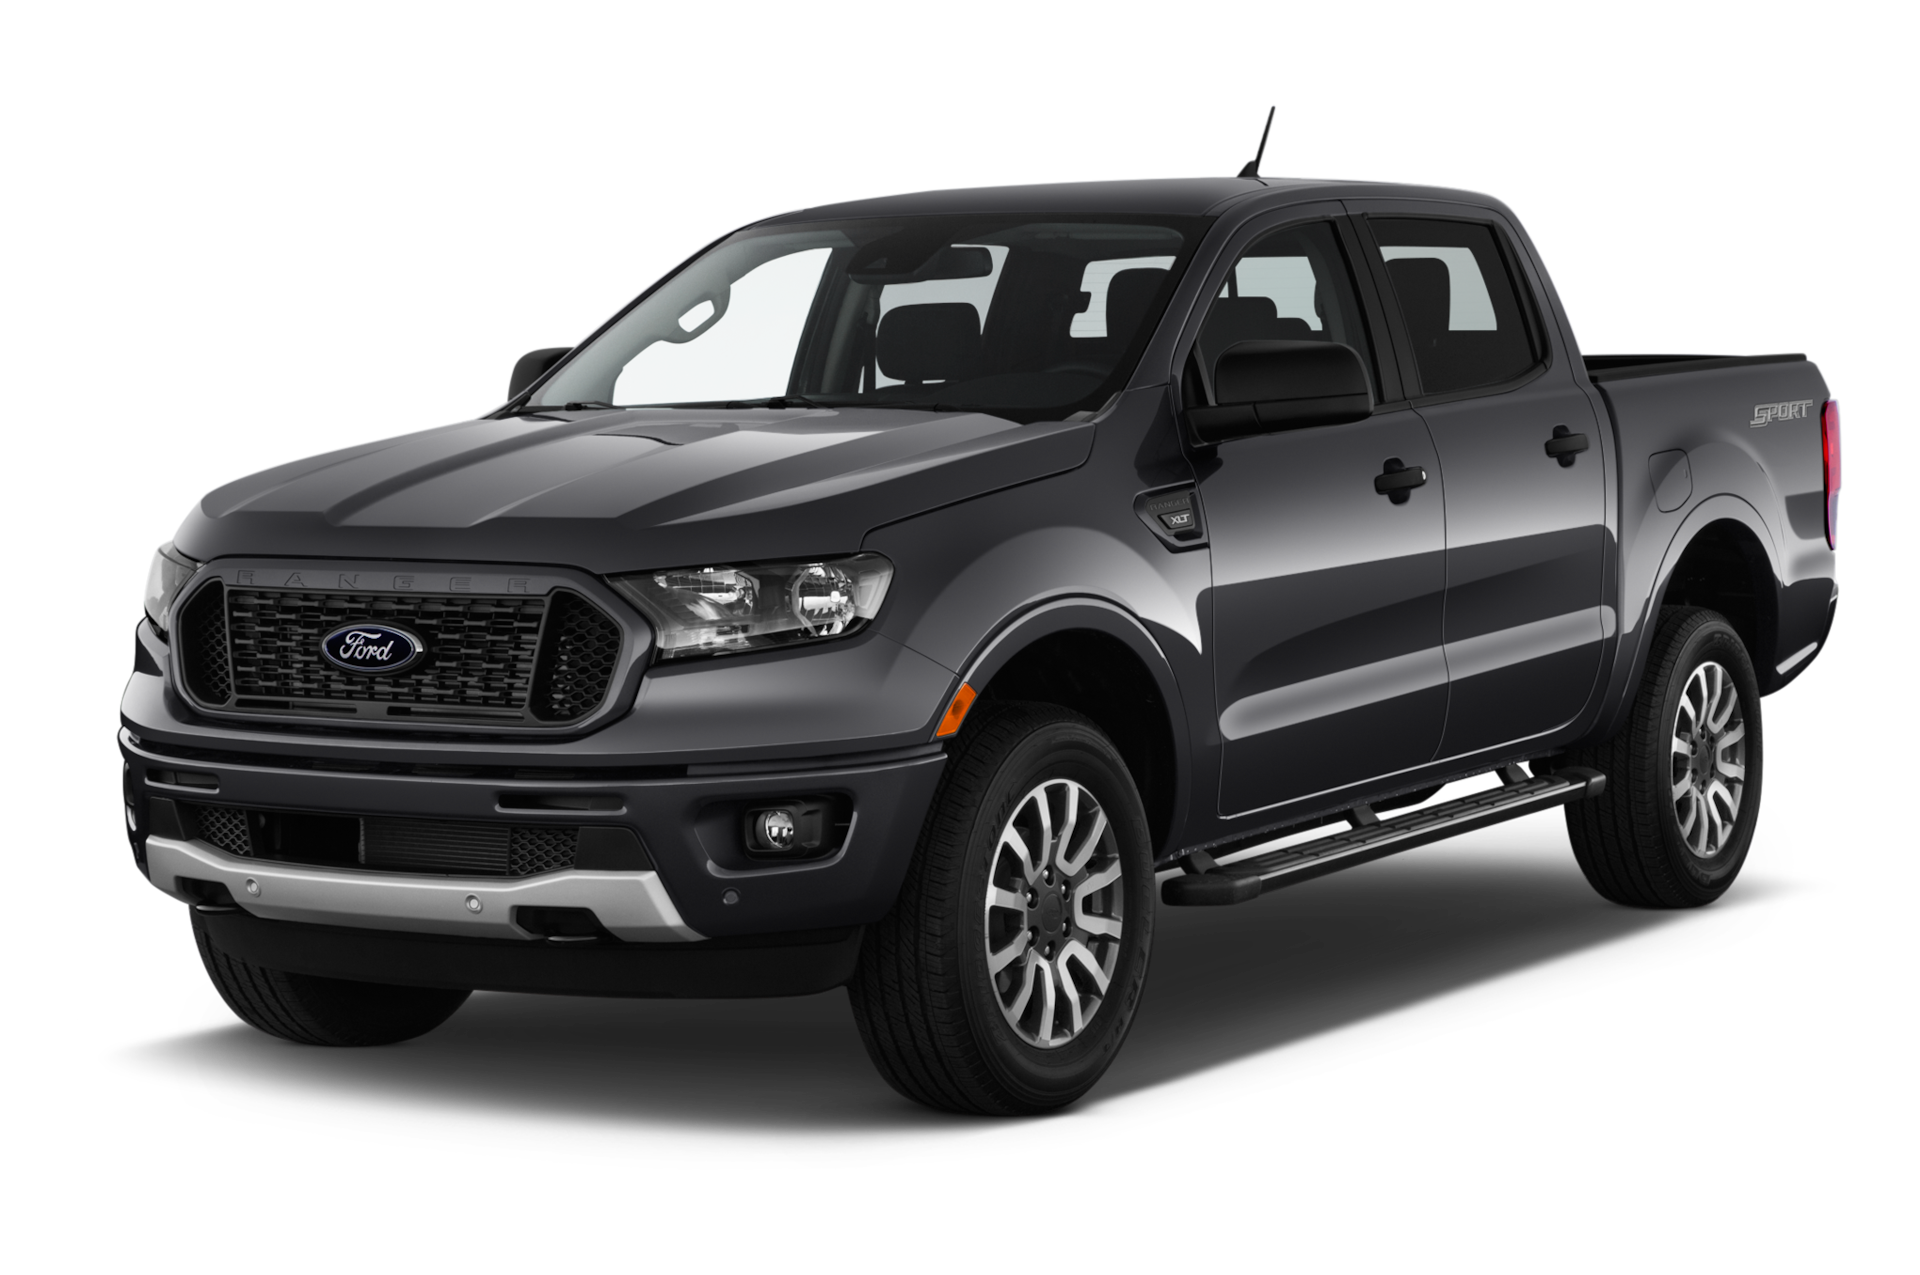 2020 Ford Ranger Prices, Reviews, and Photos - MotorTrend